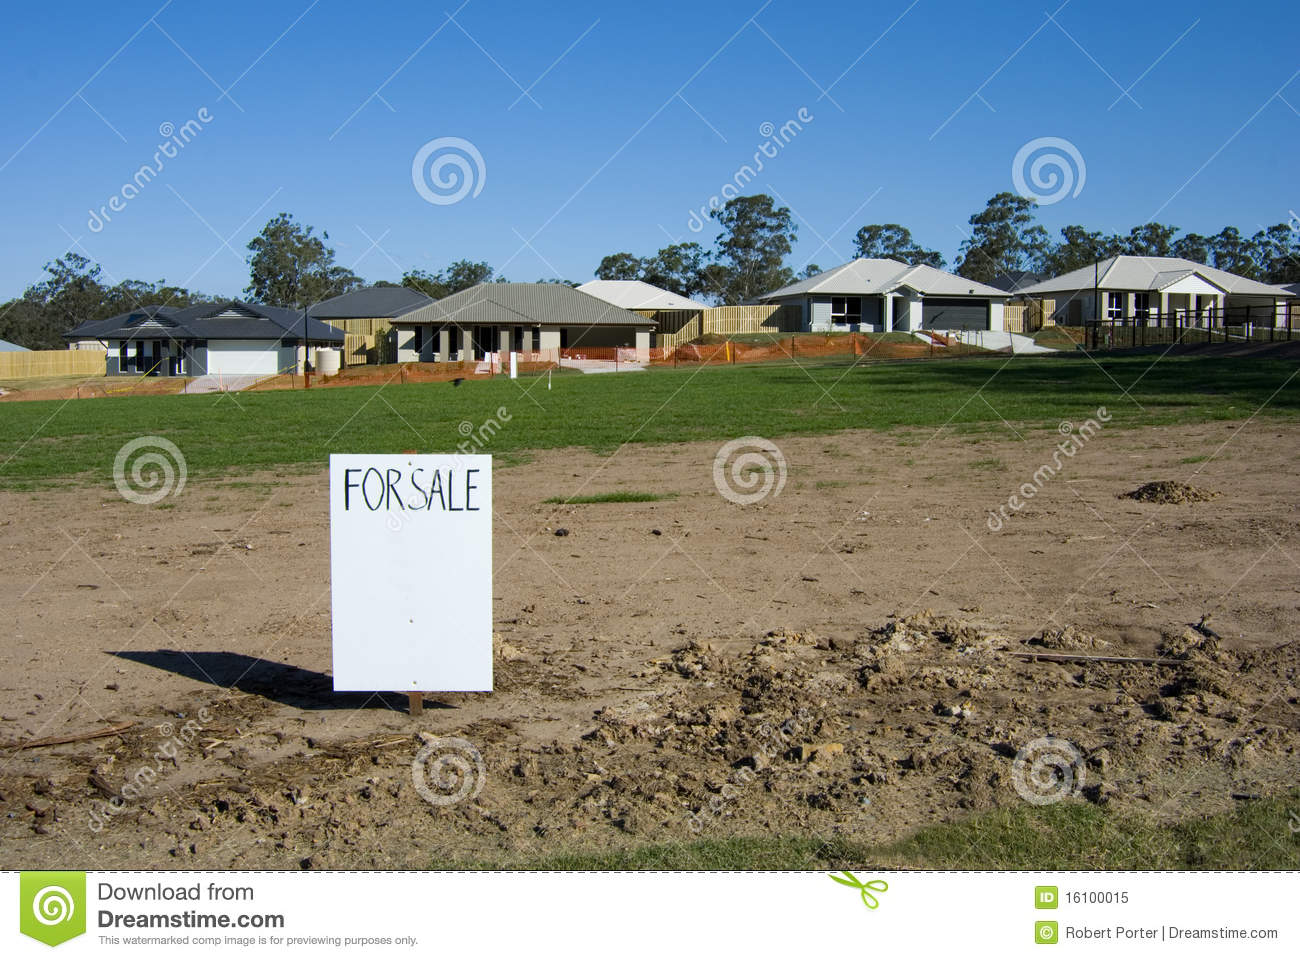 Land For Sale Royalty Free Stock Photo   Image  16100015